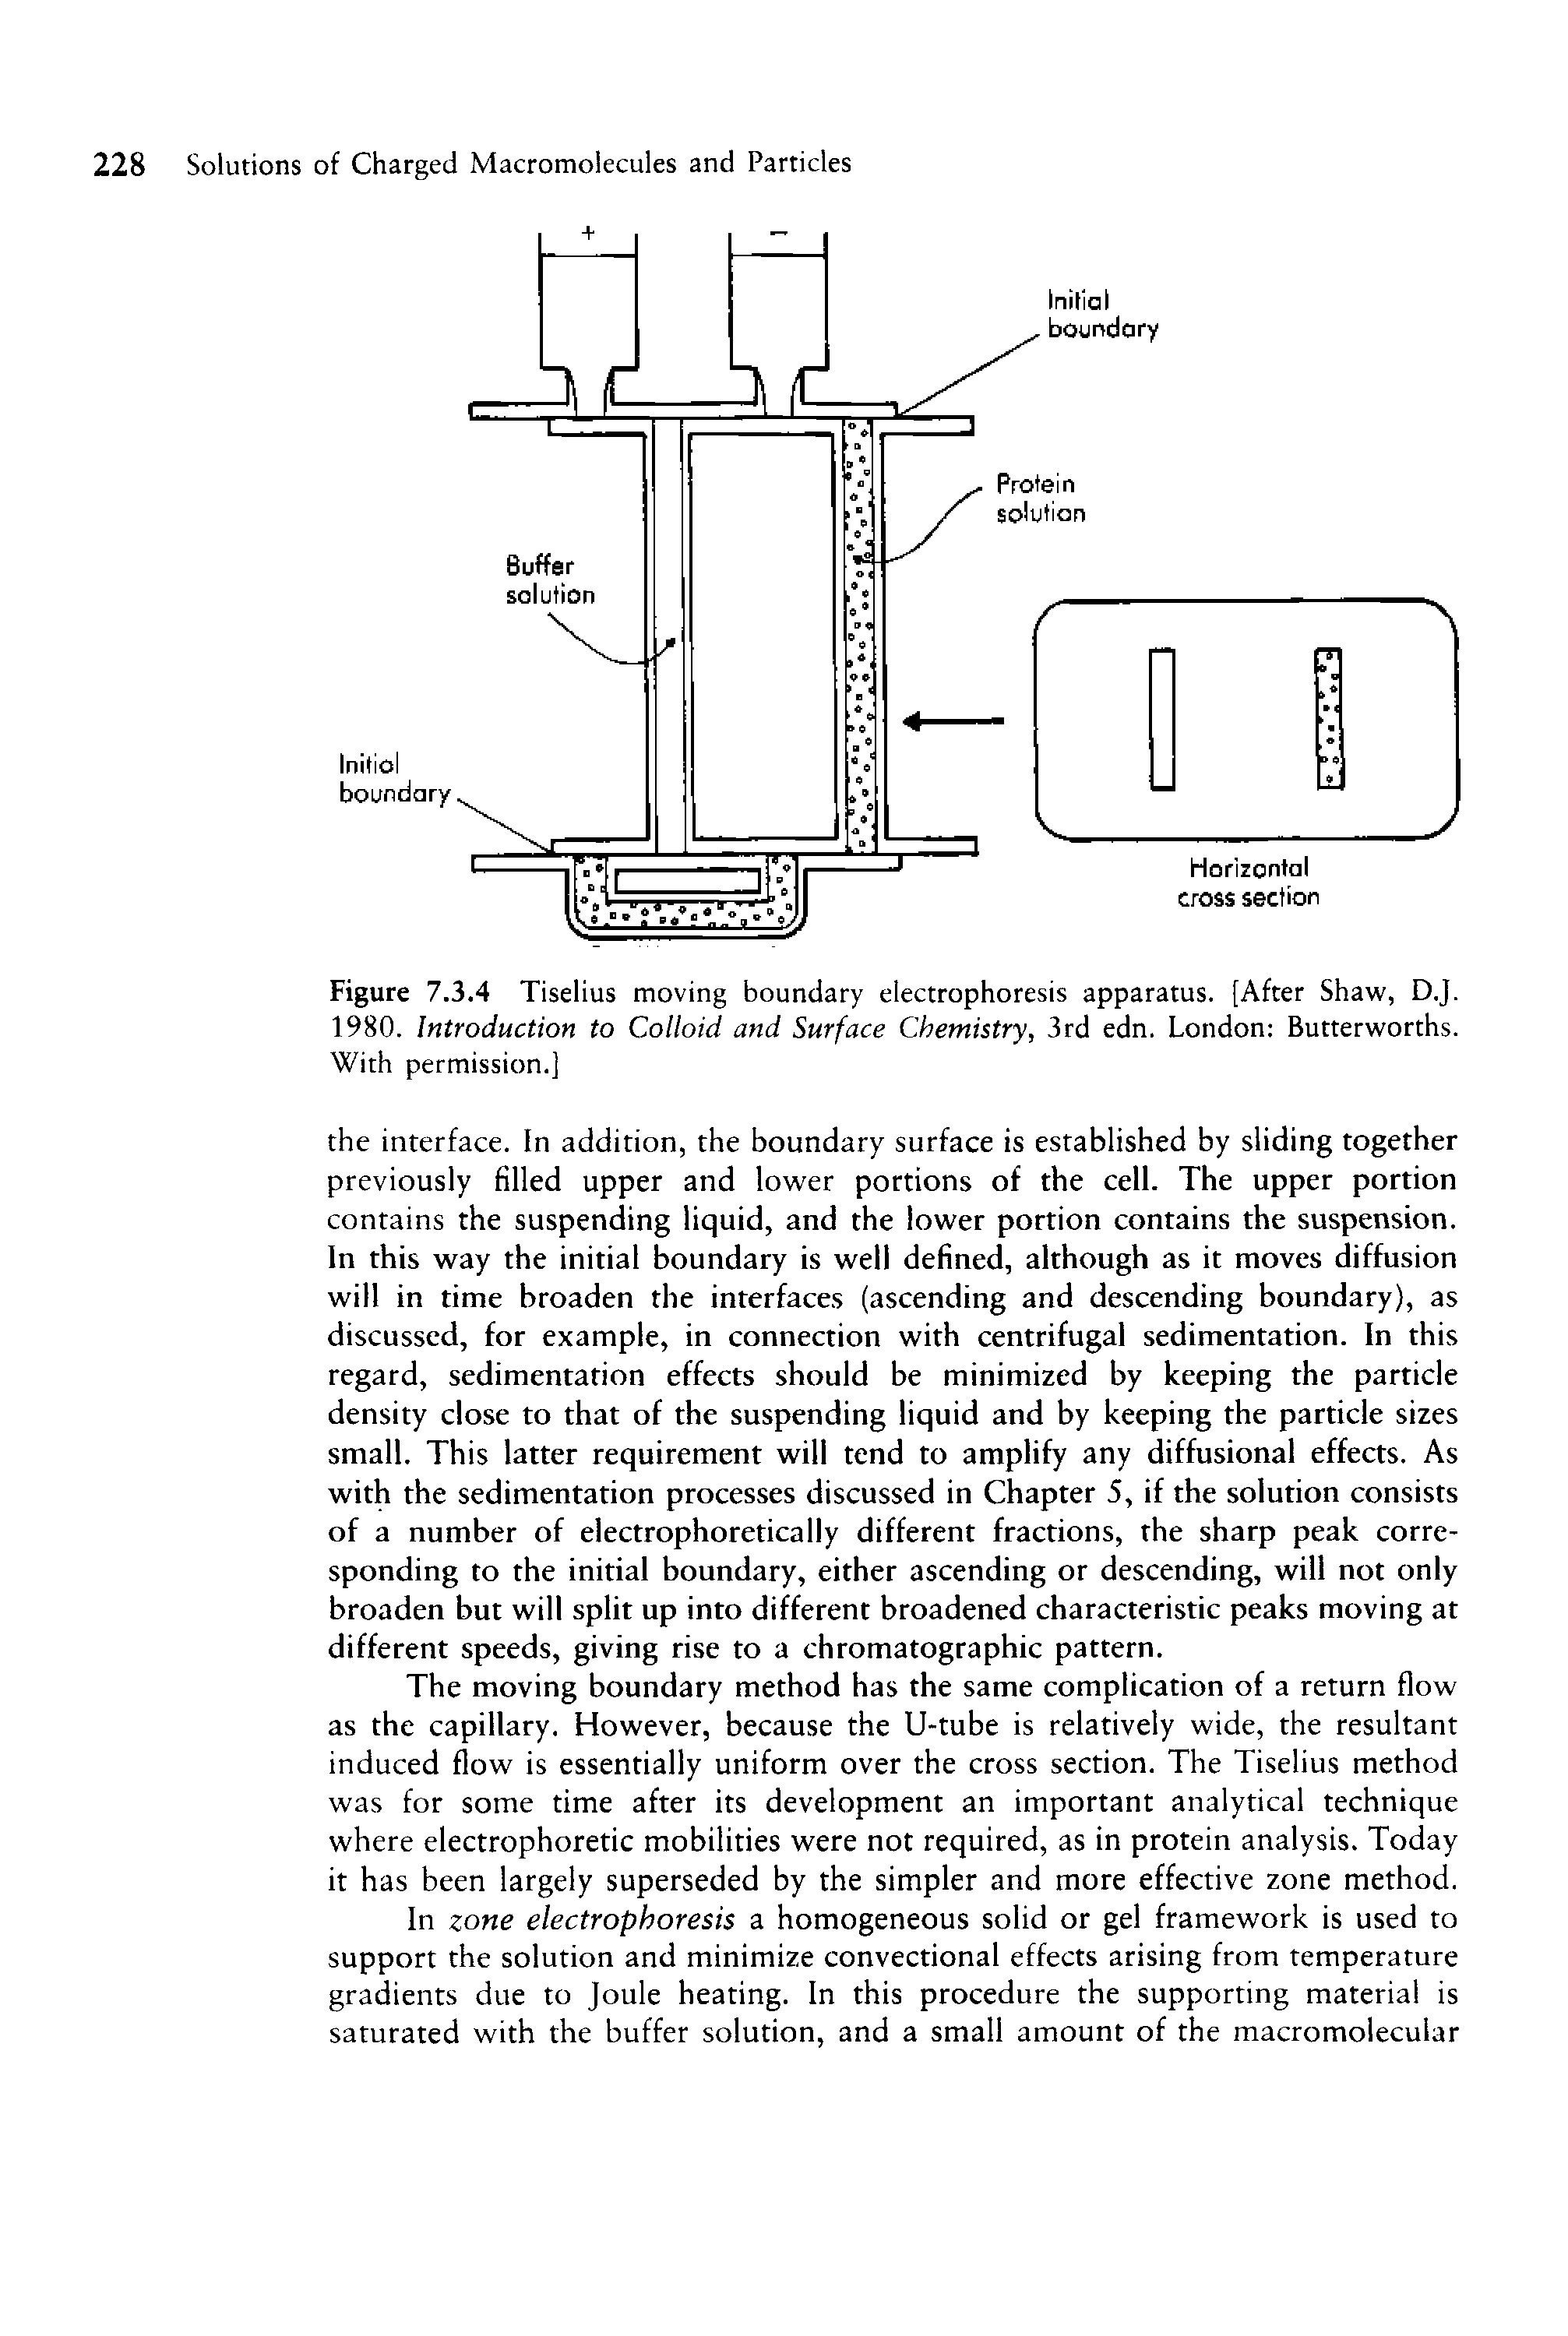 Figure 7.3.4 Tiselius moving boundary electrophoresis apparatus. [After Shaw, D.J. 1980. Introduction to Colloid and Surface Chemistry, 3rd edn. London Butterworths. With permission.]...